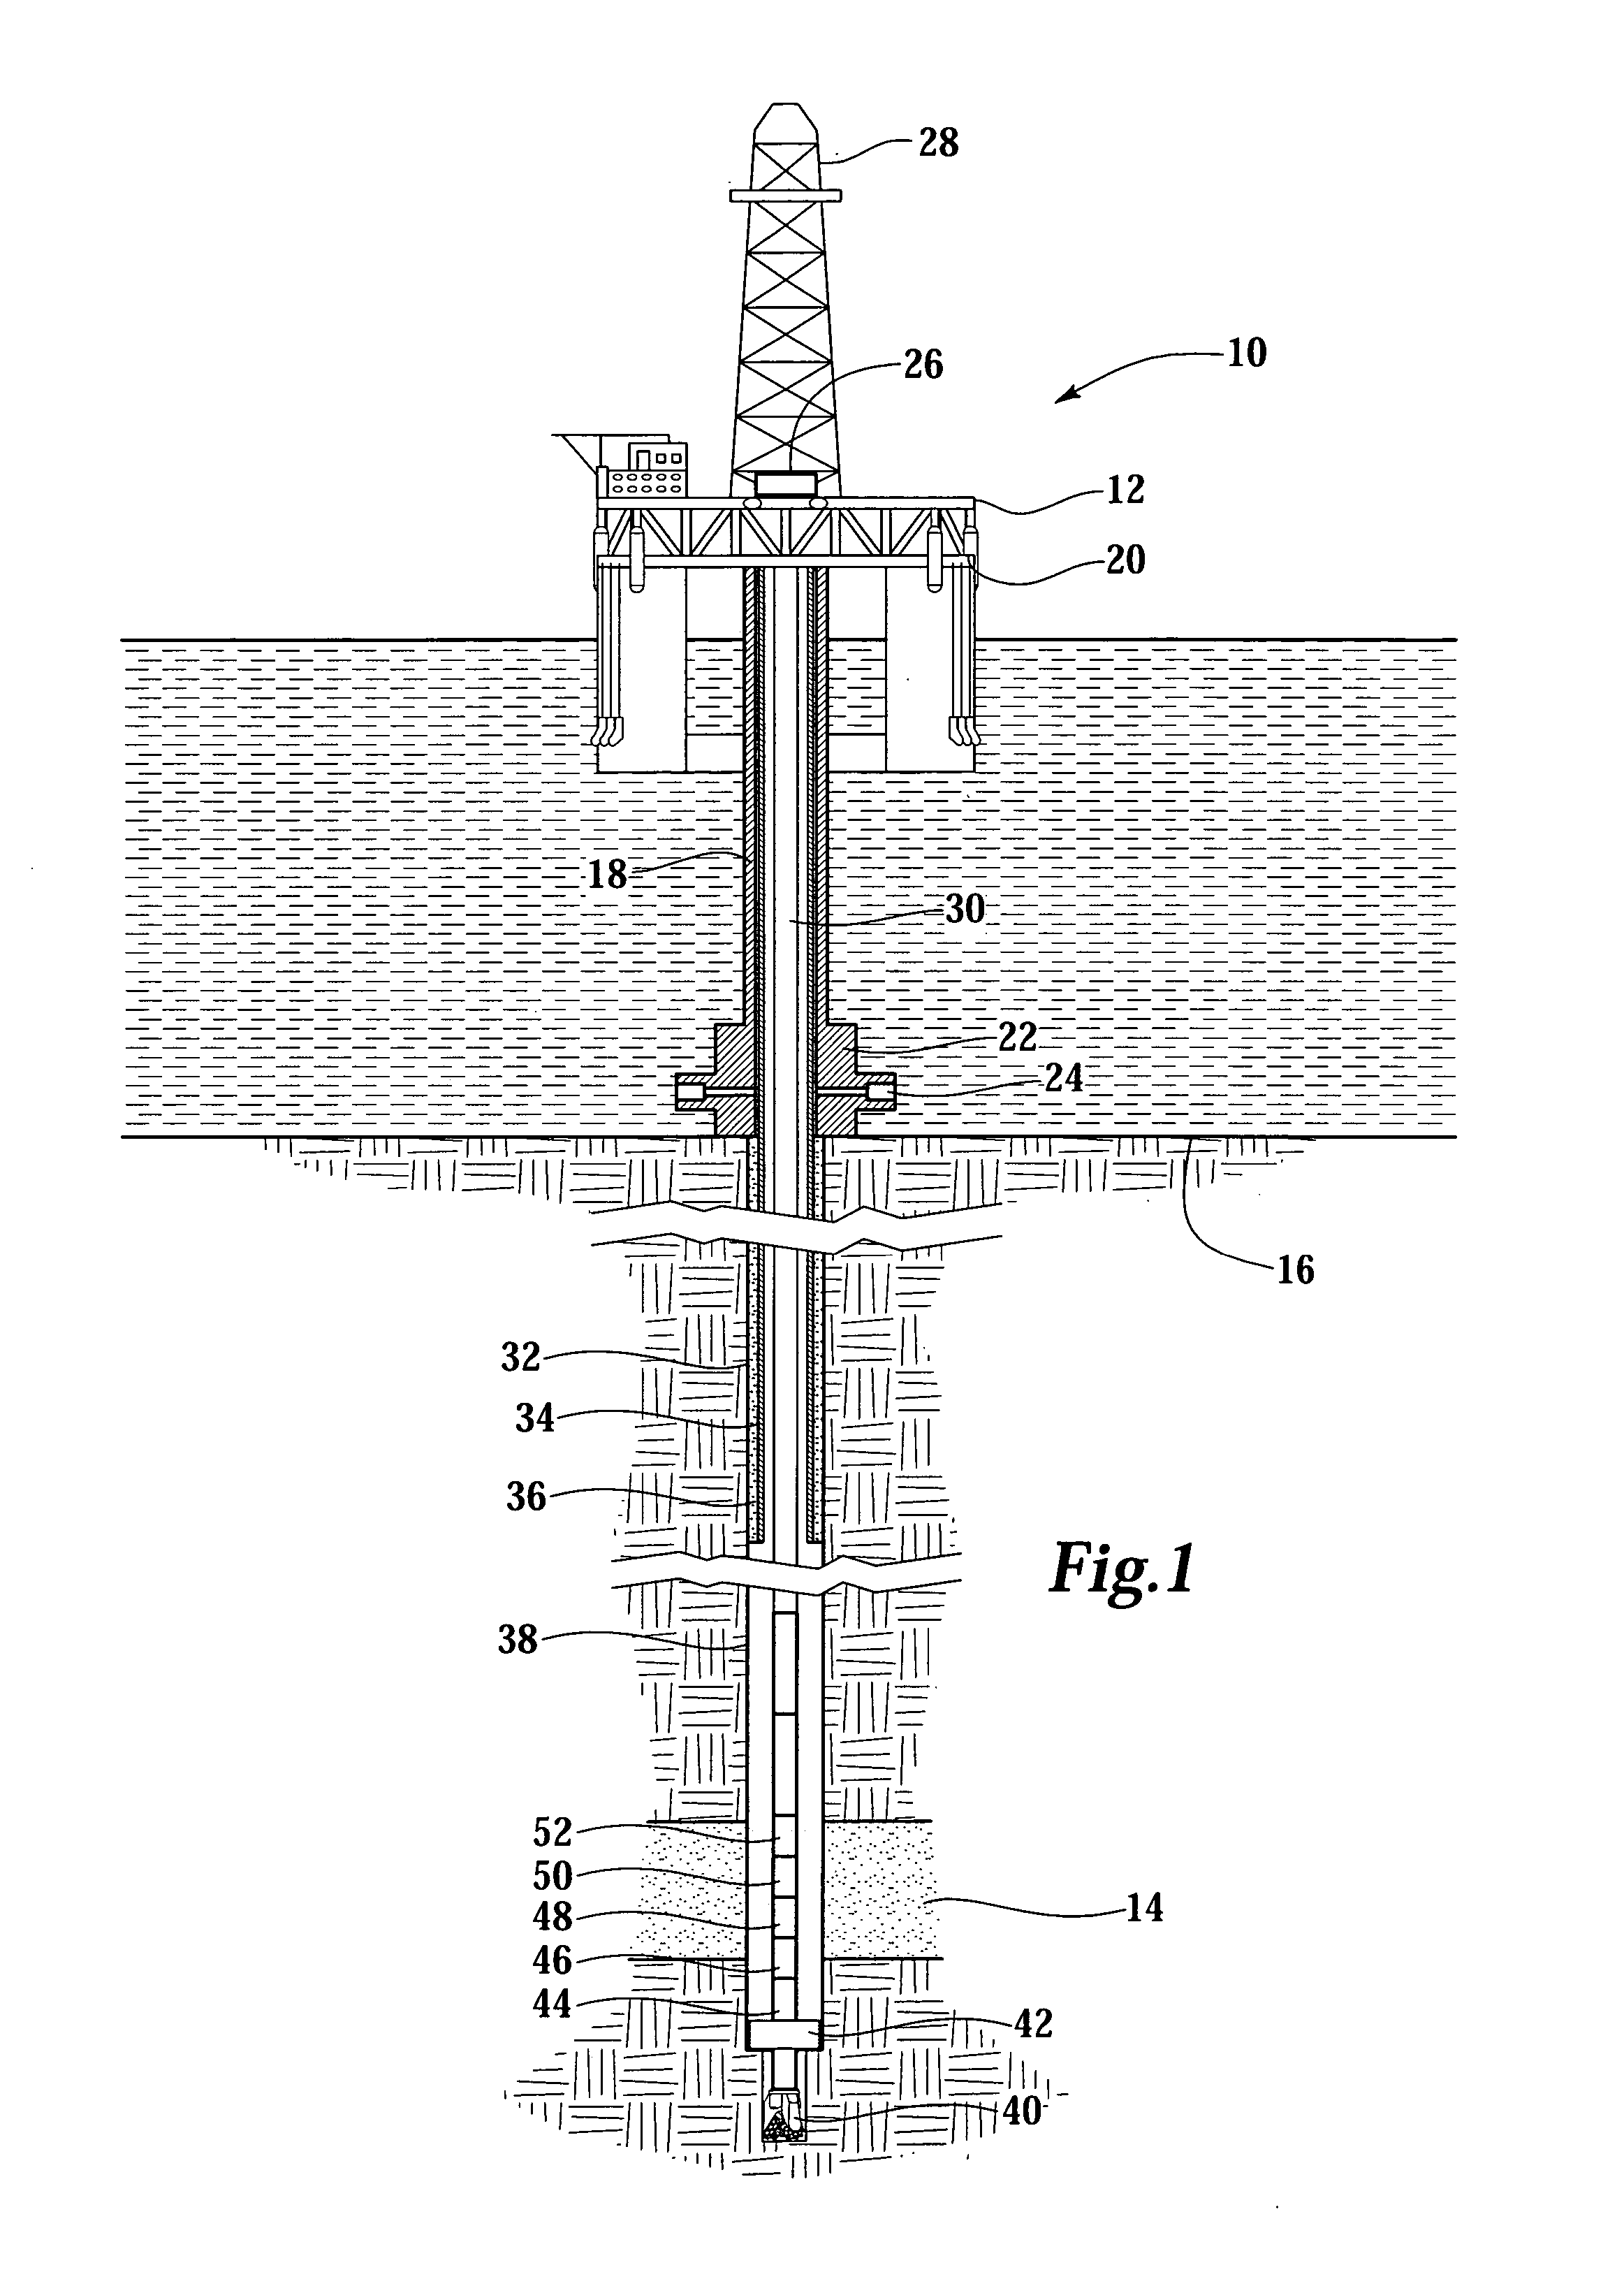 Downhole seal element formed from a nanocomposite material